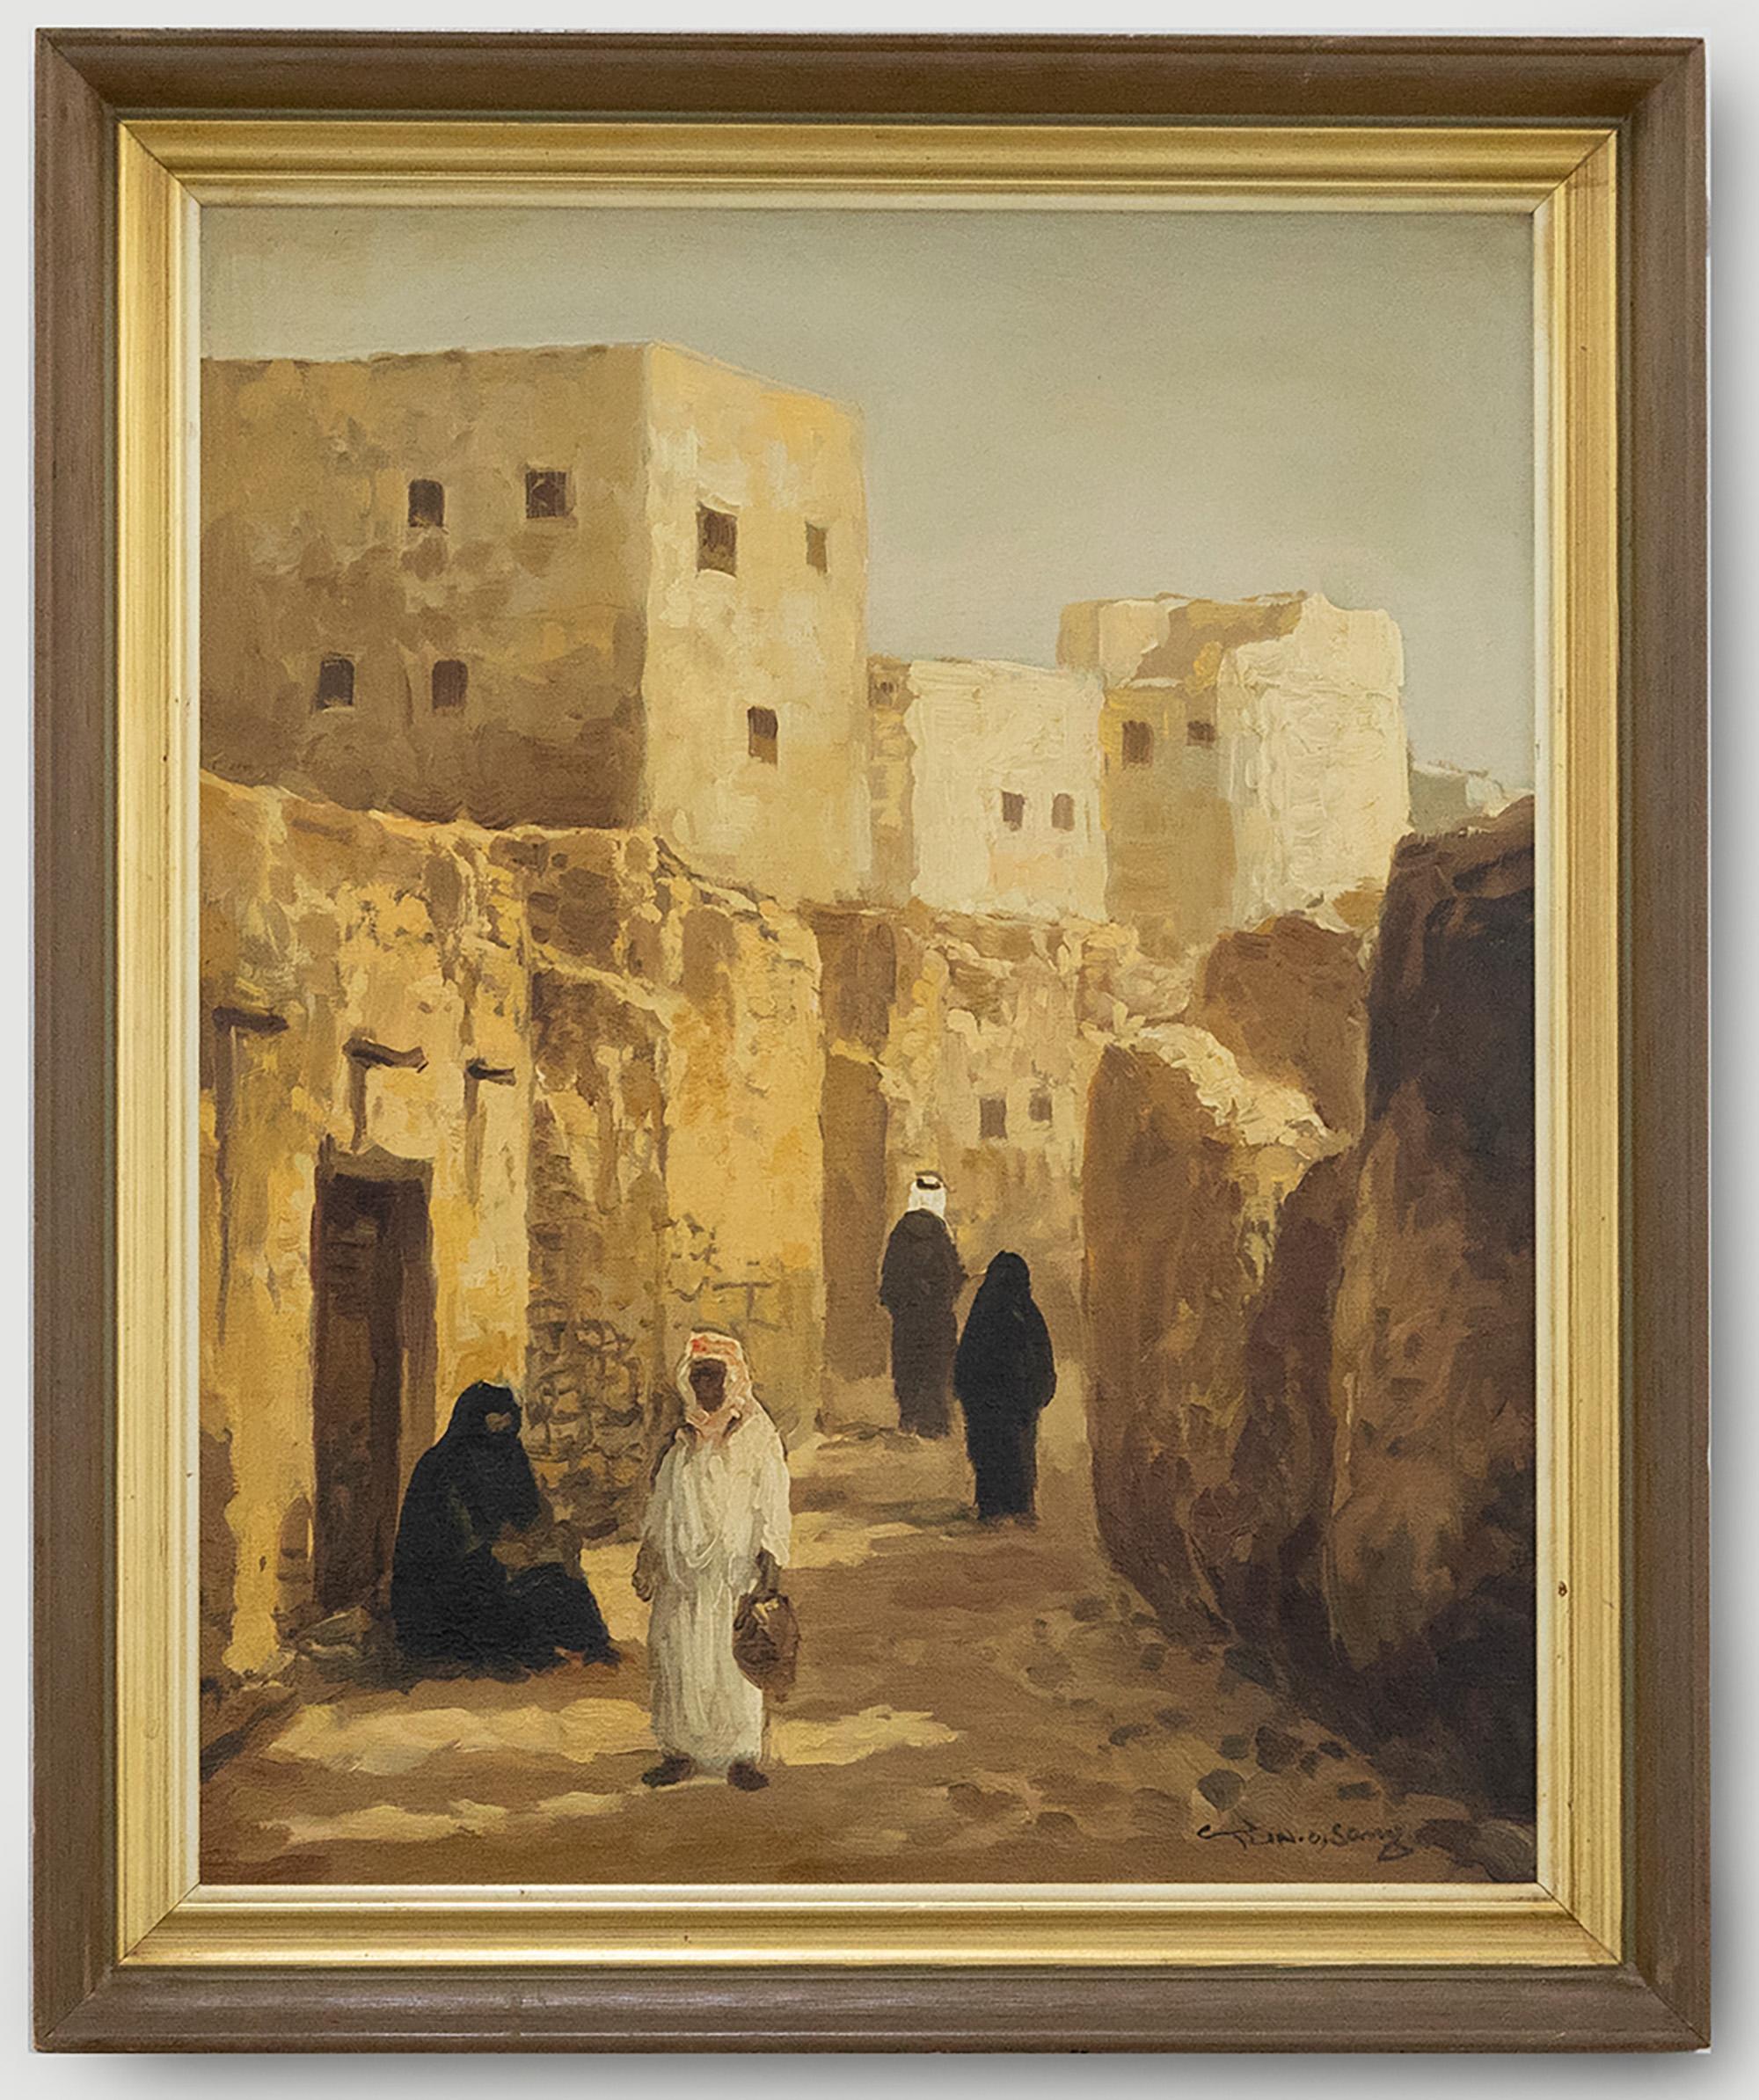 Contemporary Acrylic - Middle Eastern Scene - Painting by Unknown